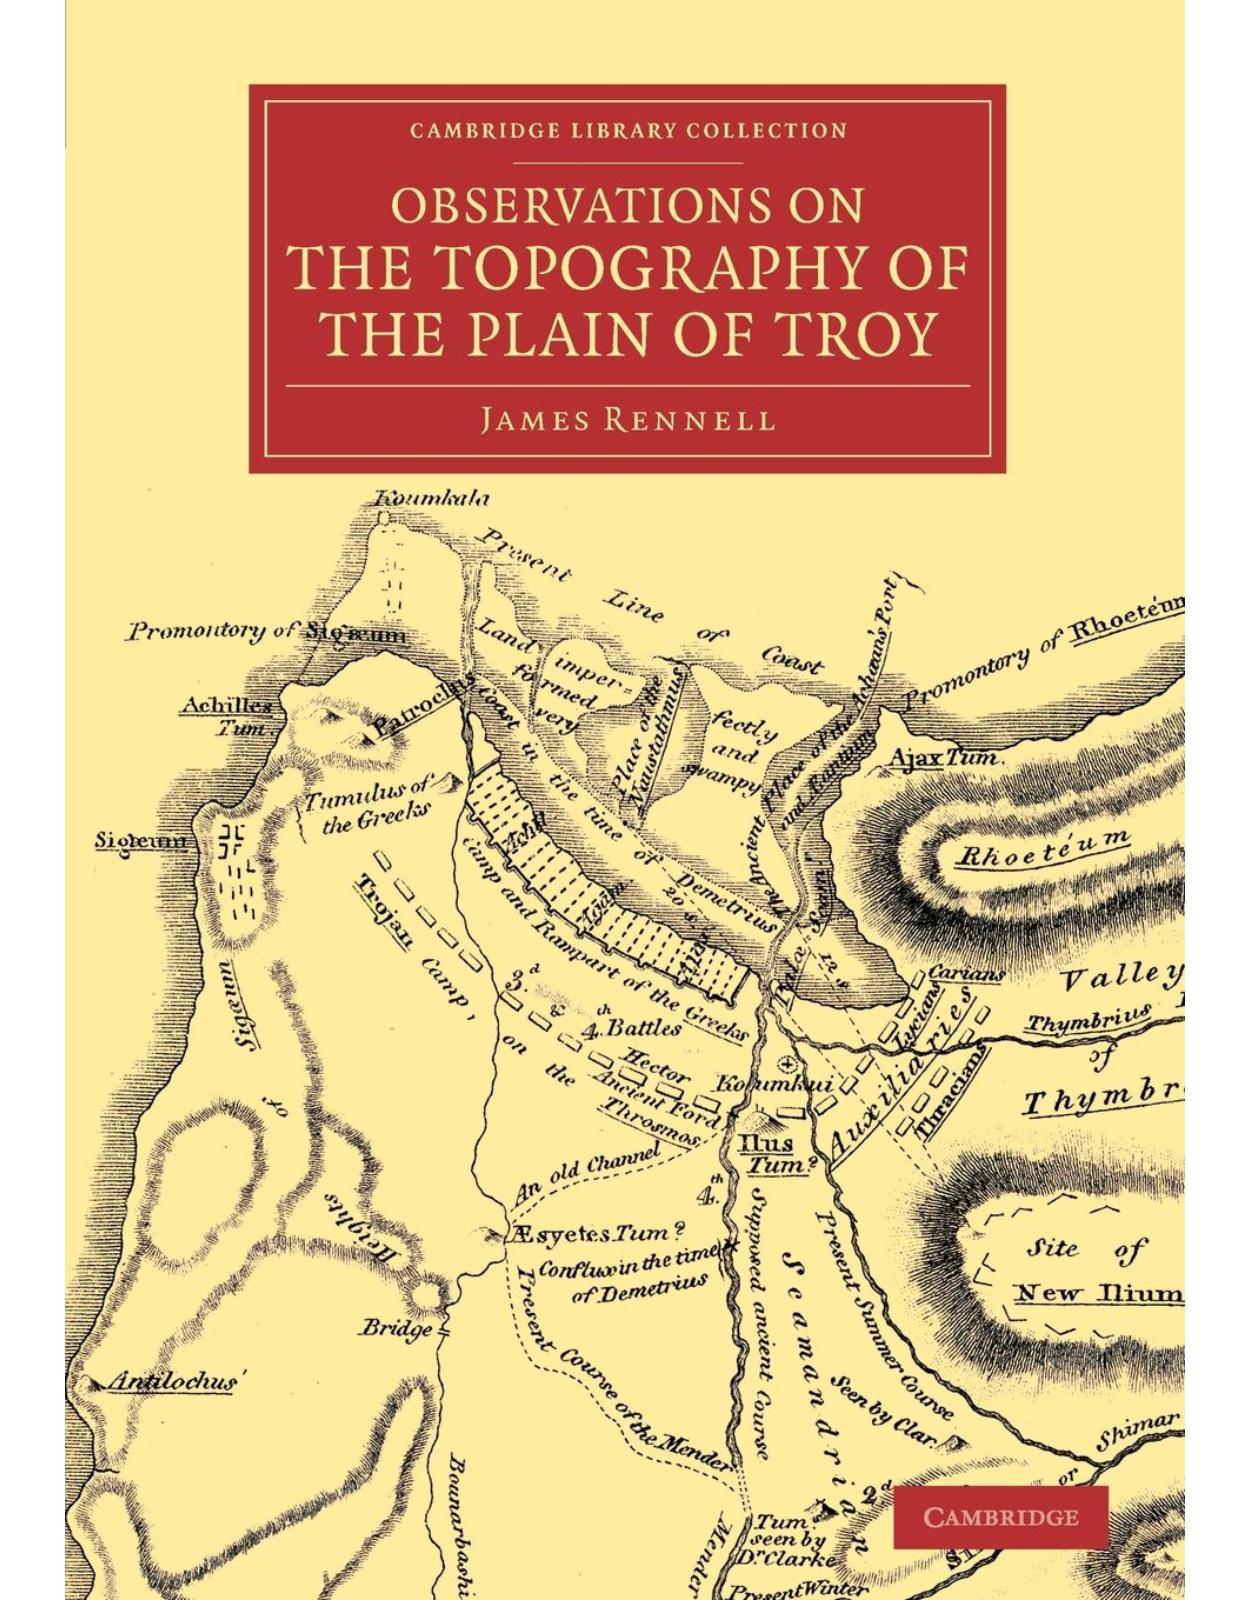 Observations on the Topography of the Plain of Troy: And on the Principal Objects within, and around it Described, or Alluded to, in the Iliad (Cambridge Library Collection - Classics)